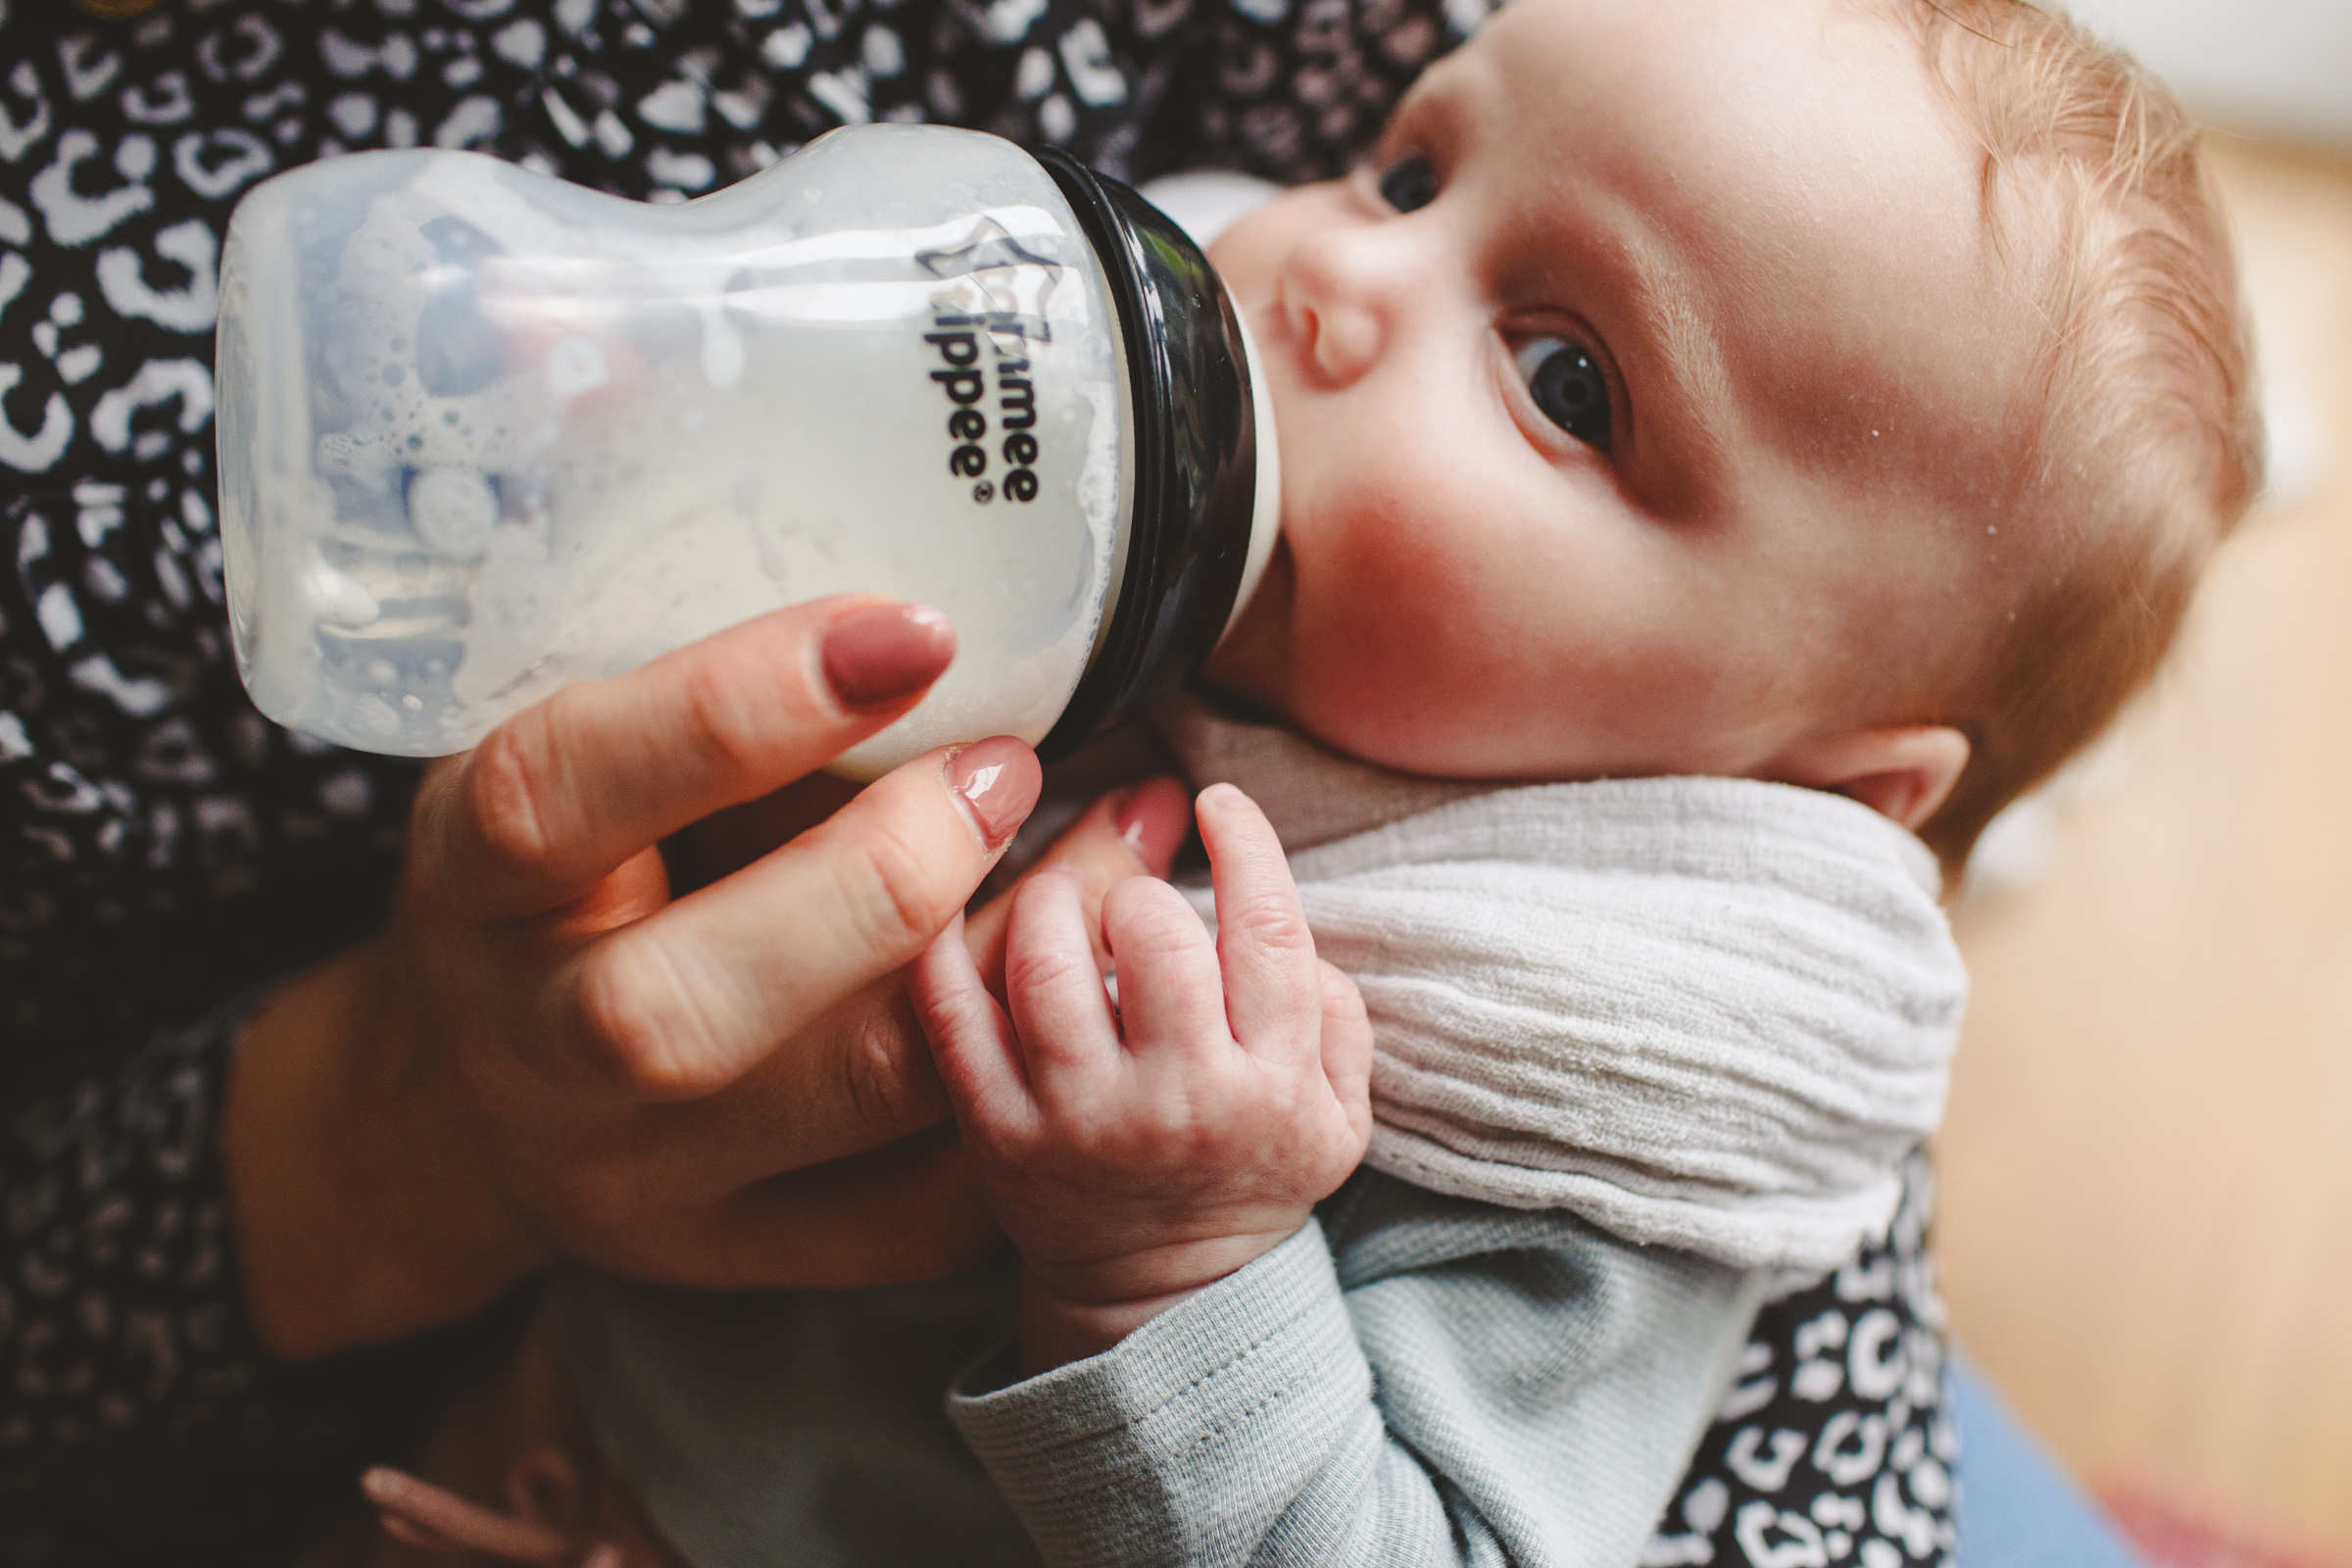 Baby drinking from bottle during family photoshoot